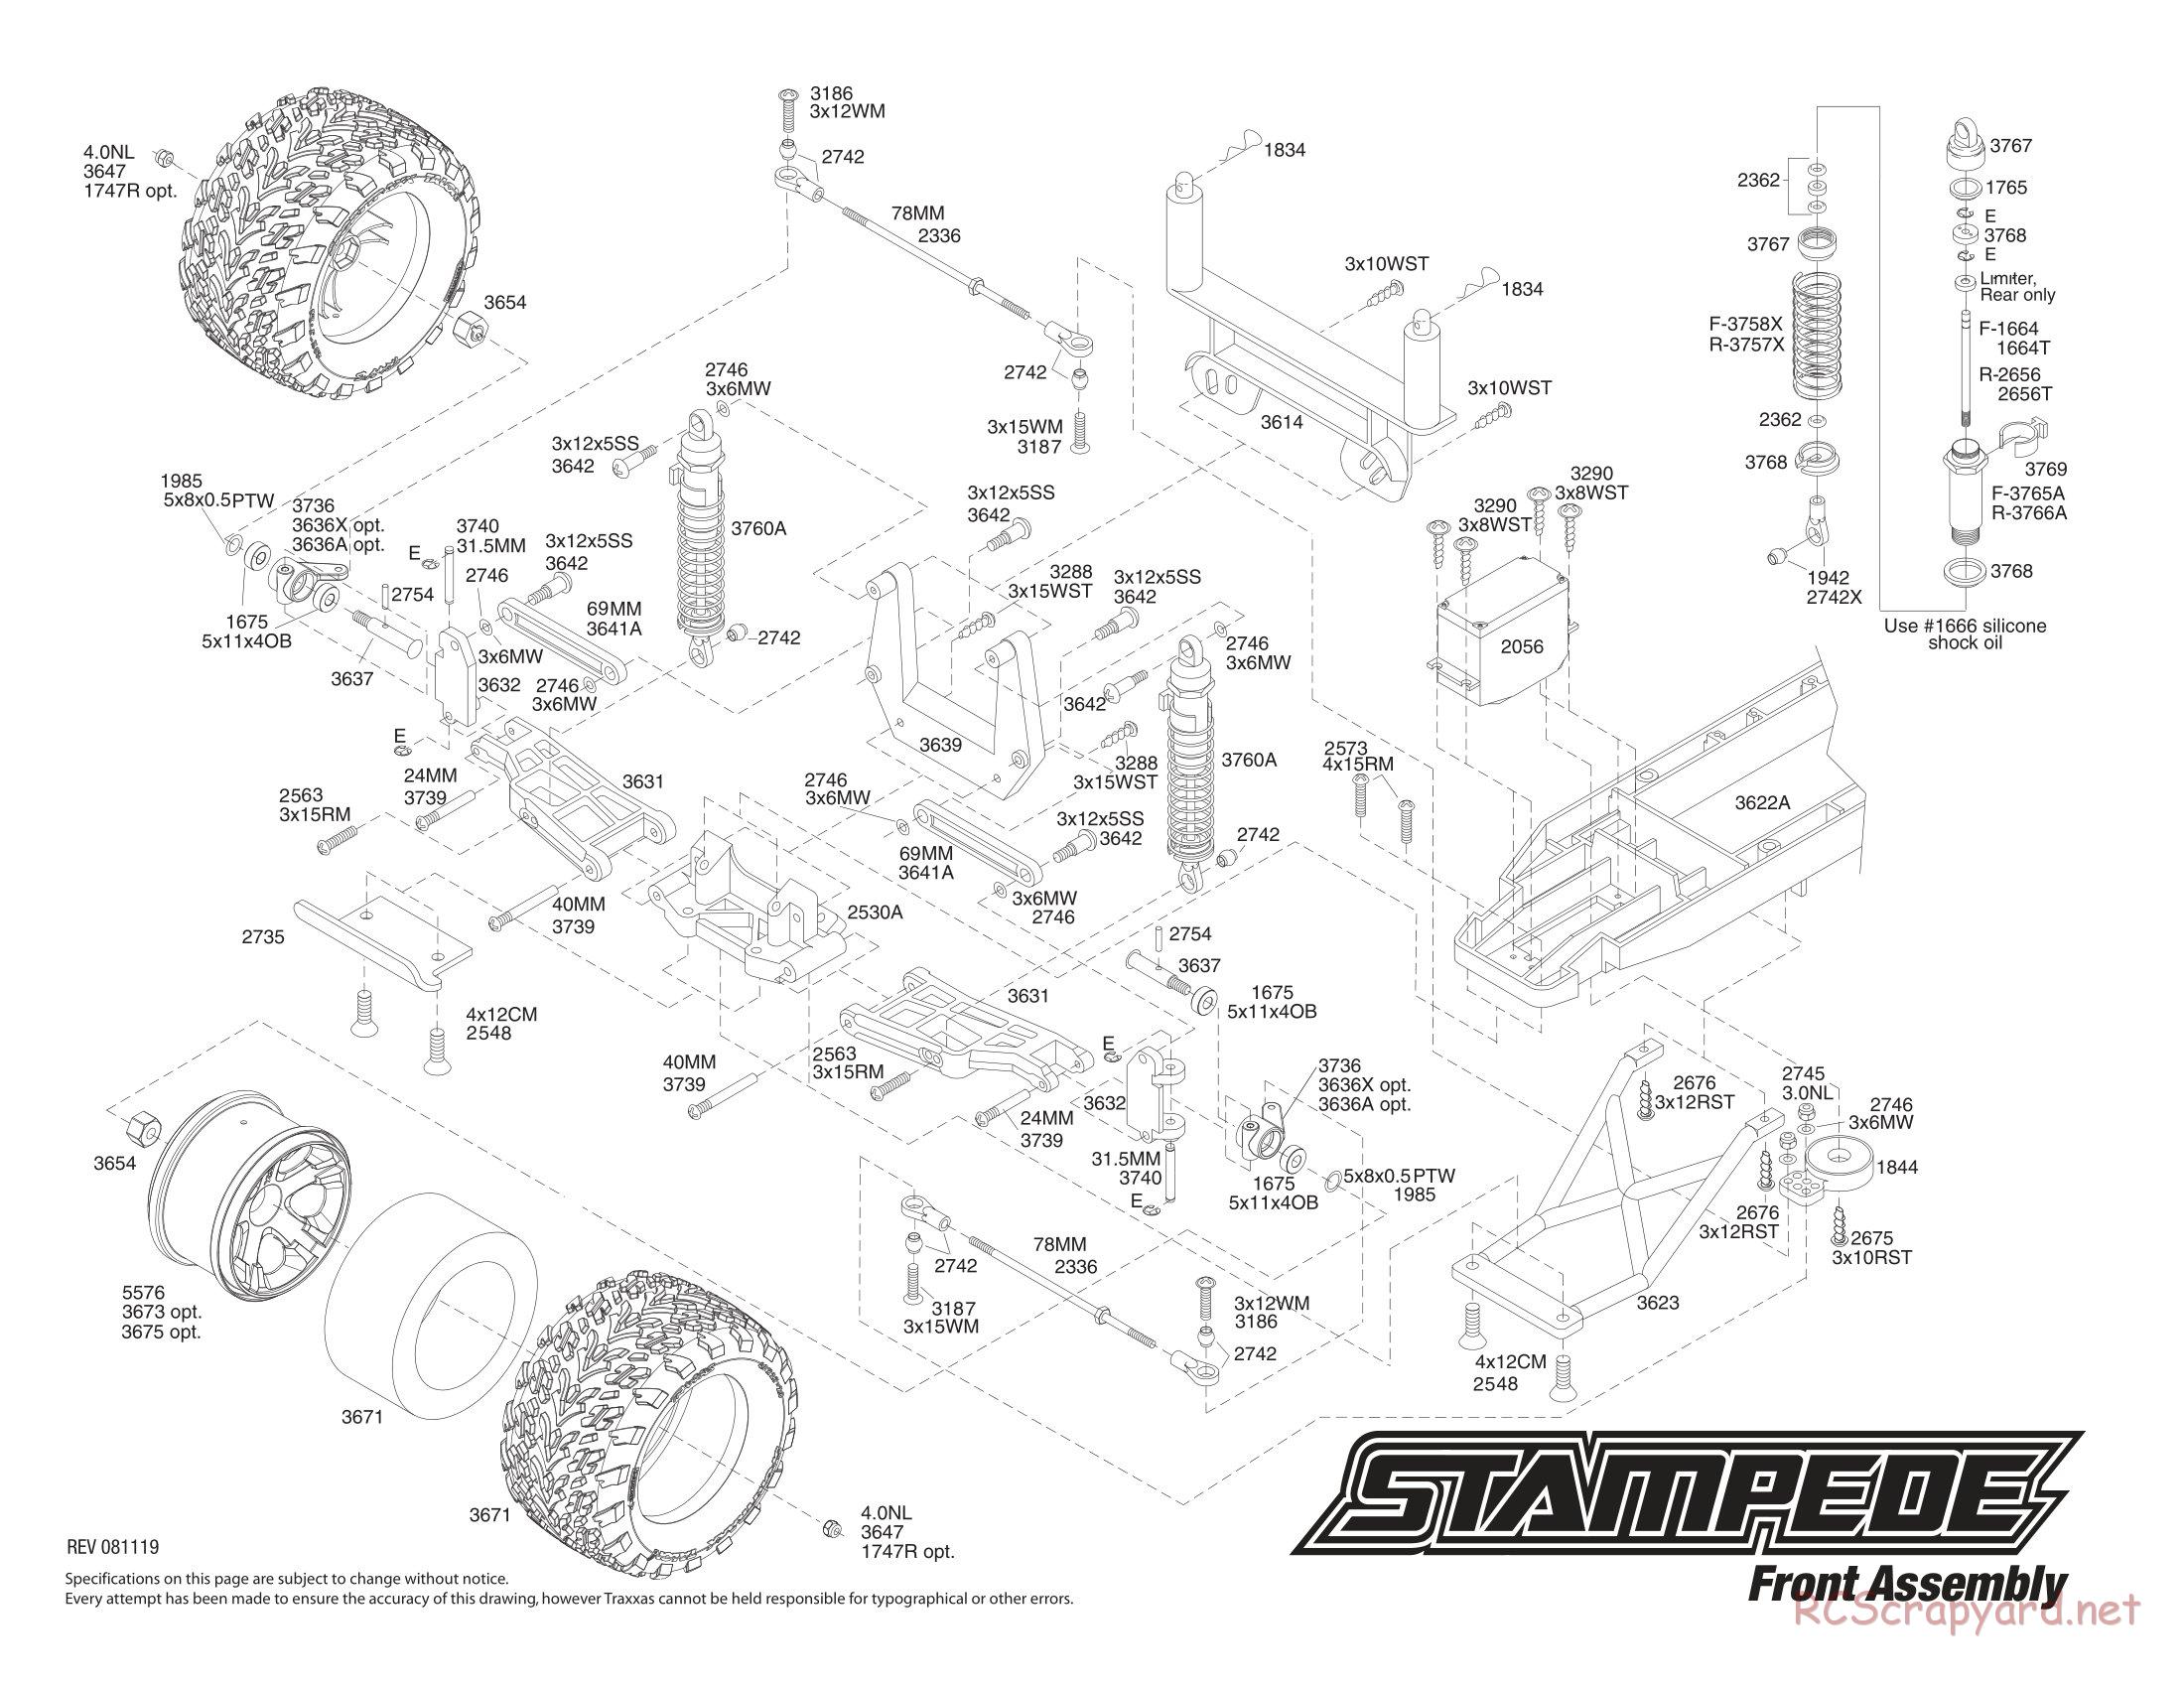 Traxxas - Stampede XL-5 - Exploded Views - Page 2